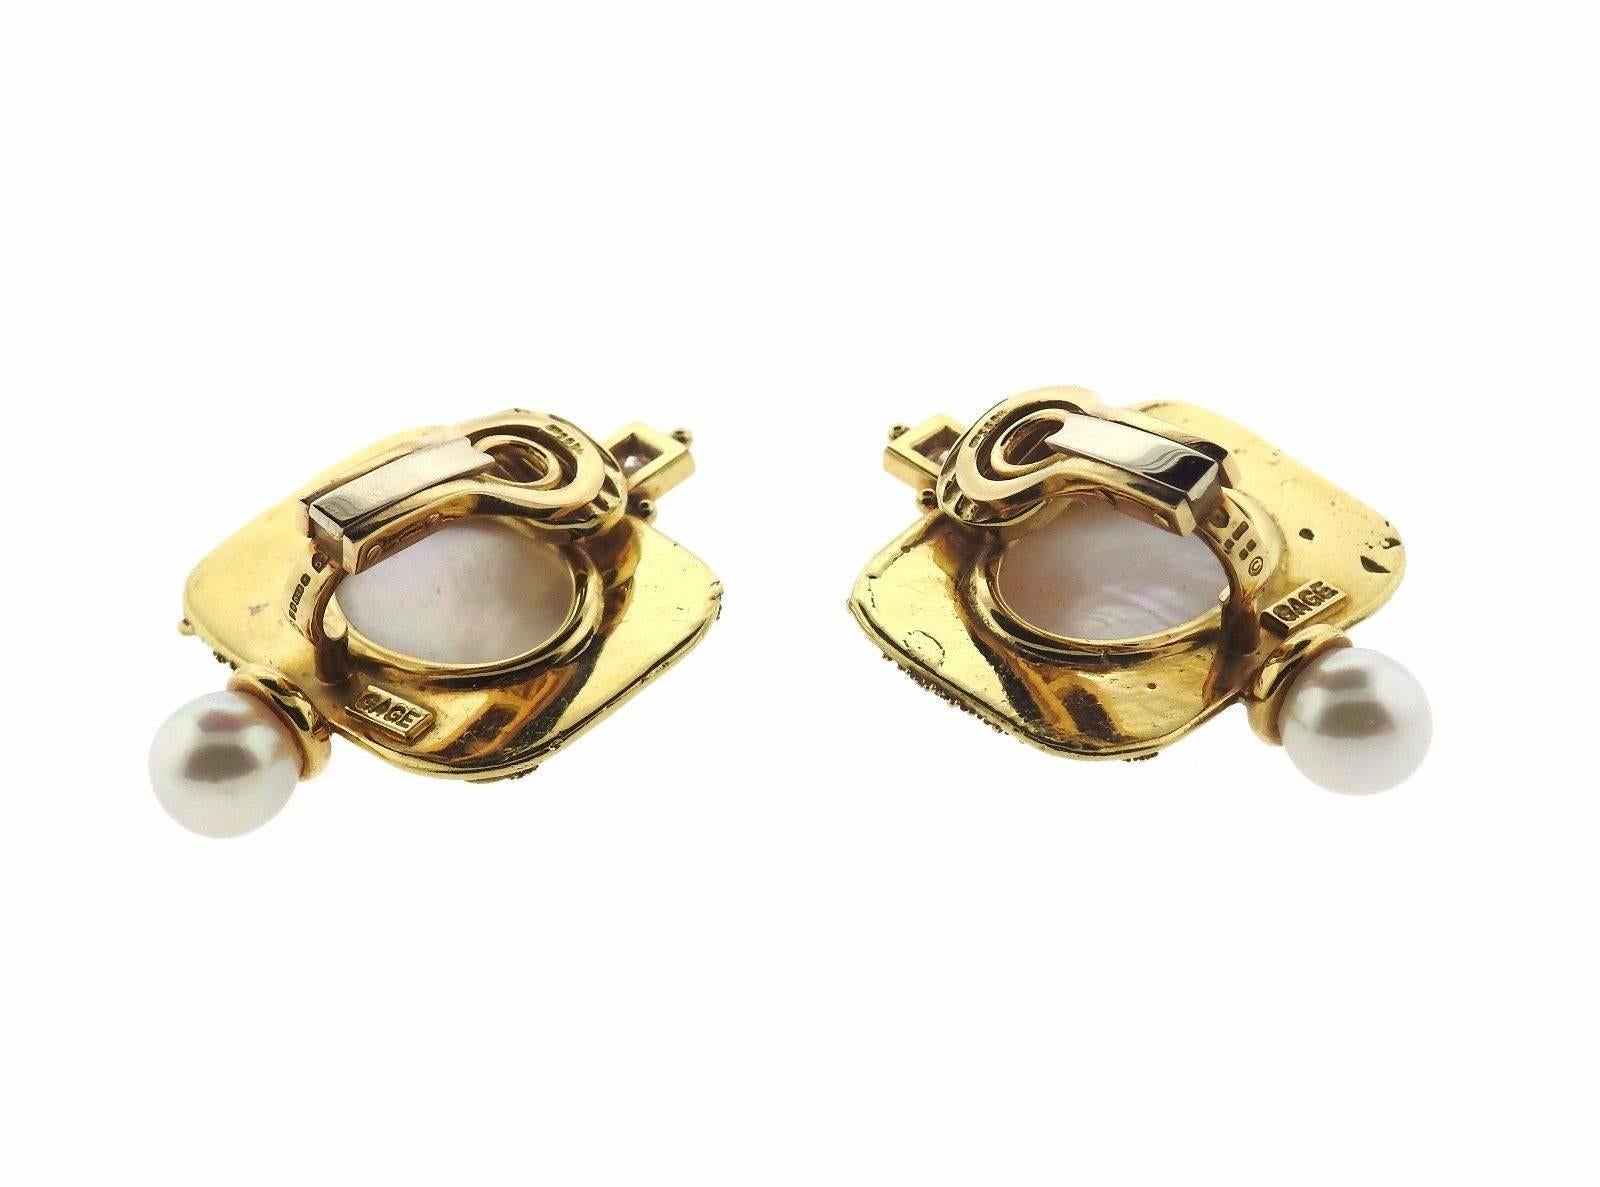 A pair of 18k yellow gold earrings set with pearls and approximately 0.16ctw.  The bottom pearl measures 7.5mm in diameter.  The earrings measure 35mm x 27mm and weigh 30.4 grams.  Marked:	Gage, 750 and English gold marks.